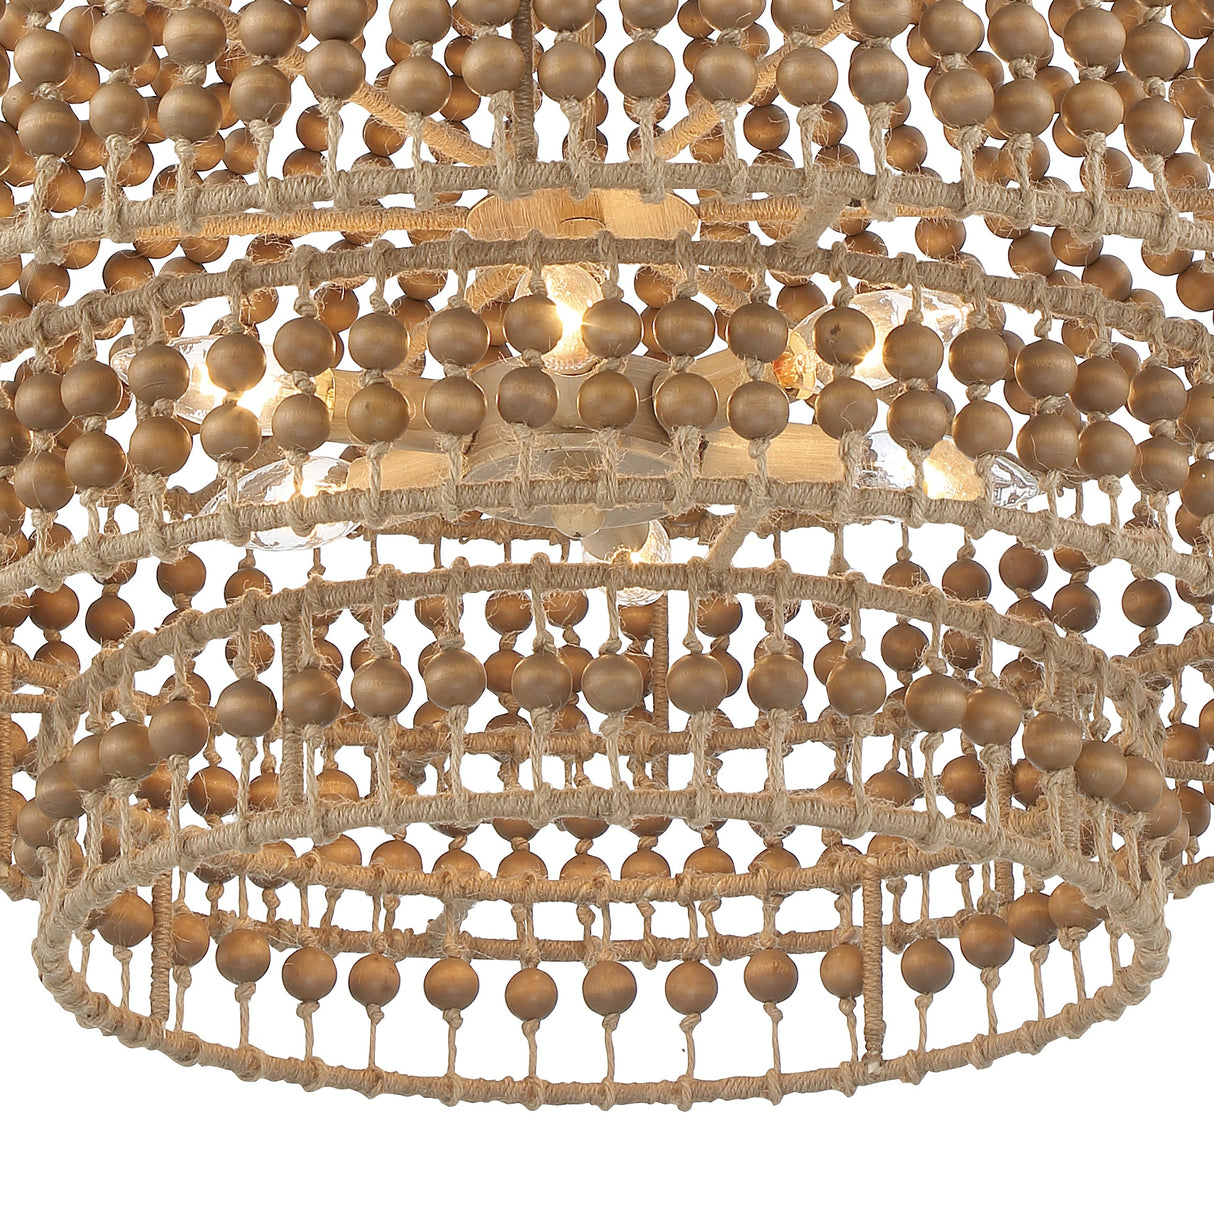 Silas 6 Light Burnished Silver Chandelier SIL-B6006-BS